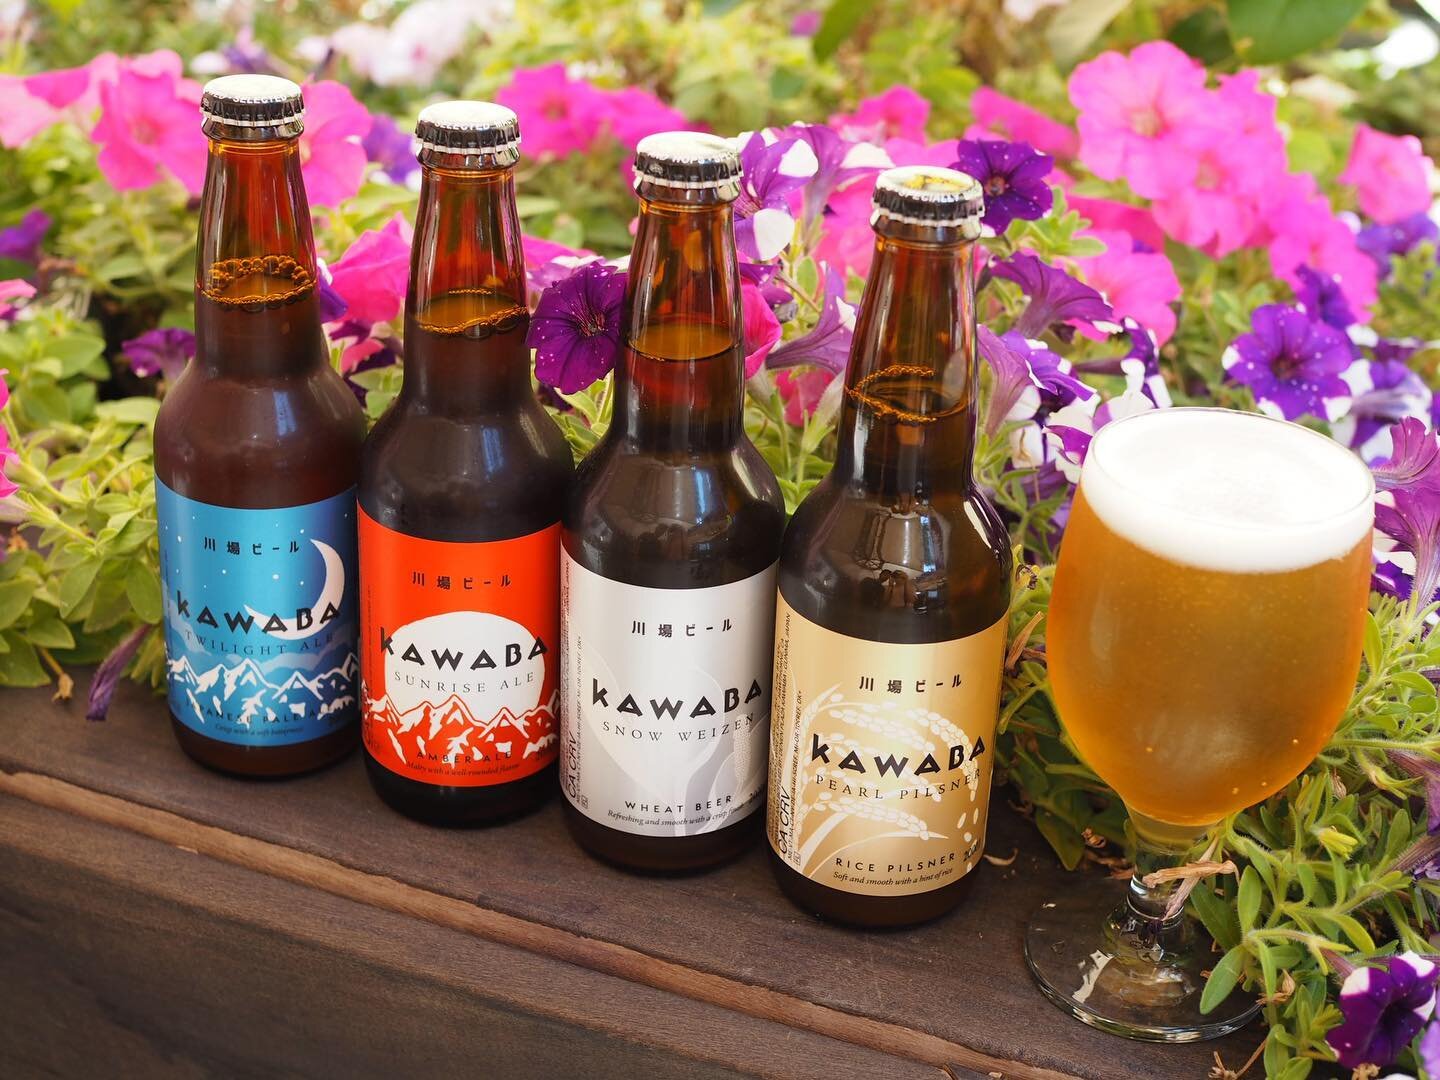 🎲 SEPTEMBER PROMO! 🍻

Roll The Dice continues! This time, you can roll the dice to win Japanese Craft Beer for just $0.10!

We have chosen a selection of four KAWABA craft beers from Gunma, Japan. 

Swipe to see the rules ➡️